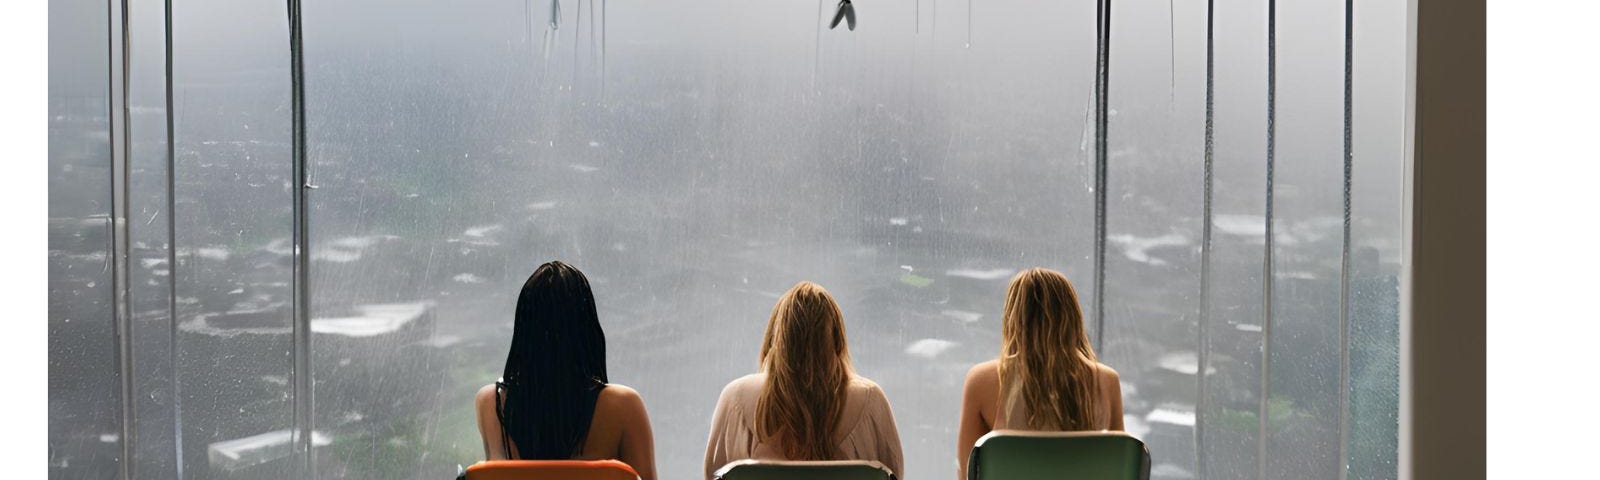 Seen from behind, three barefoot women sitting in folding chairs looking at a futuristic city landscape, heavy rain coming down.